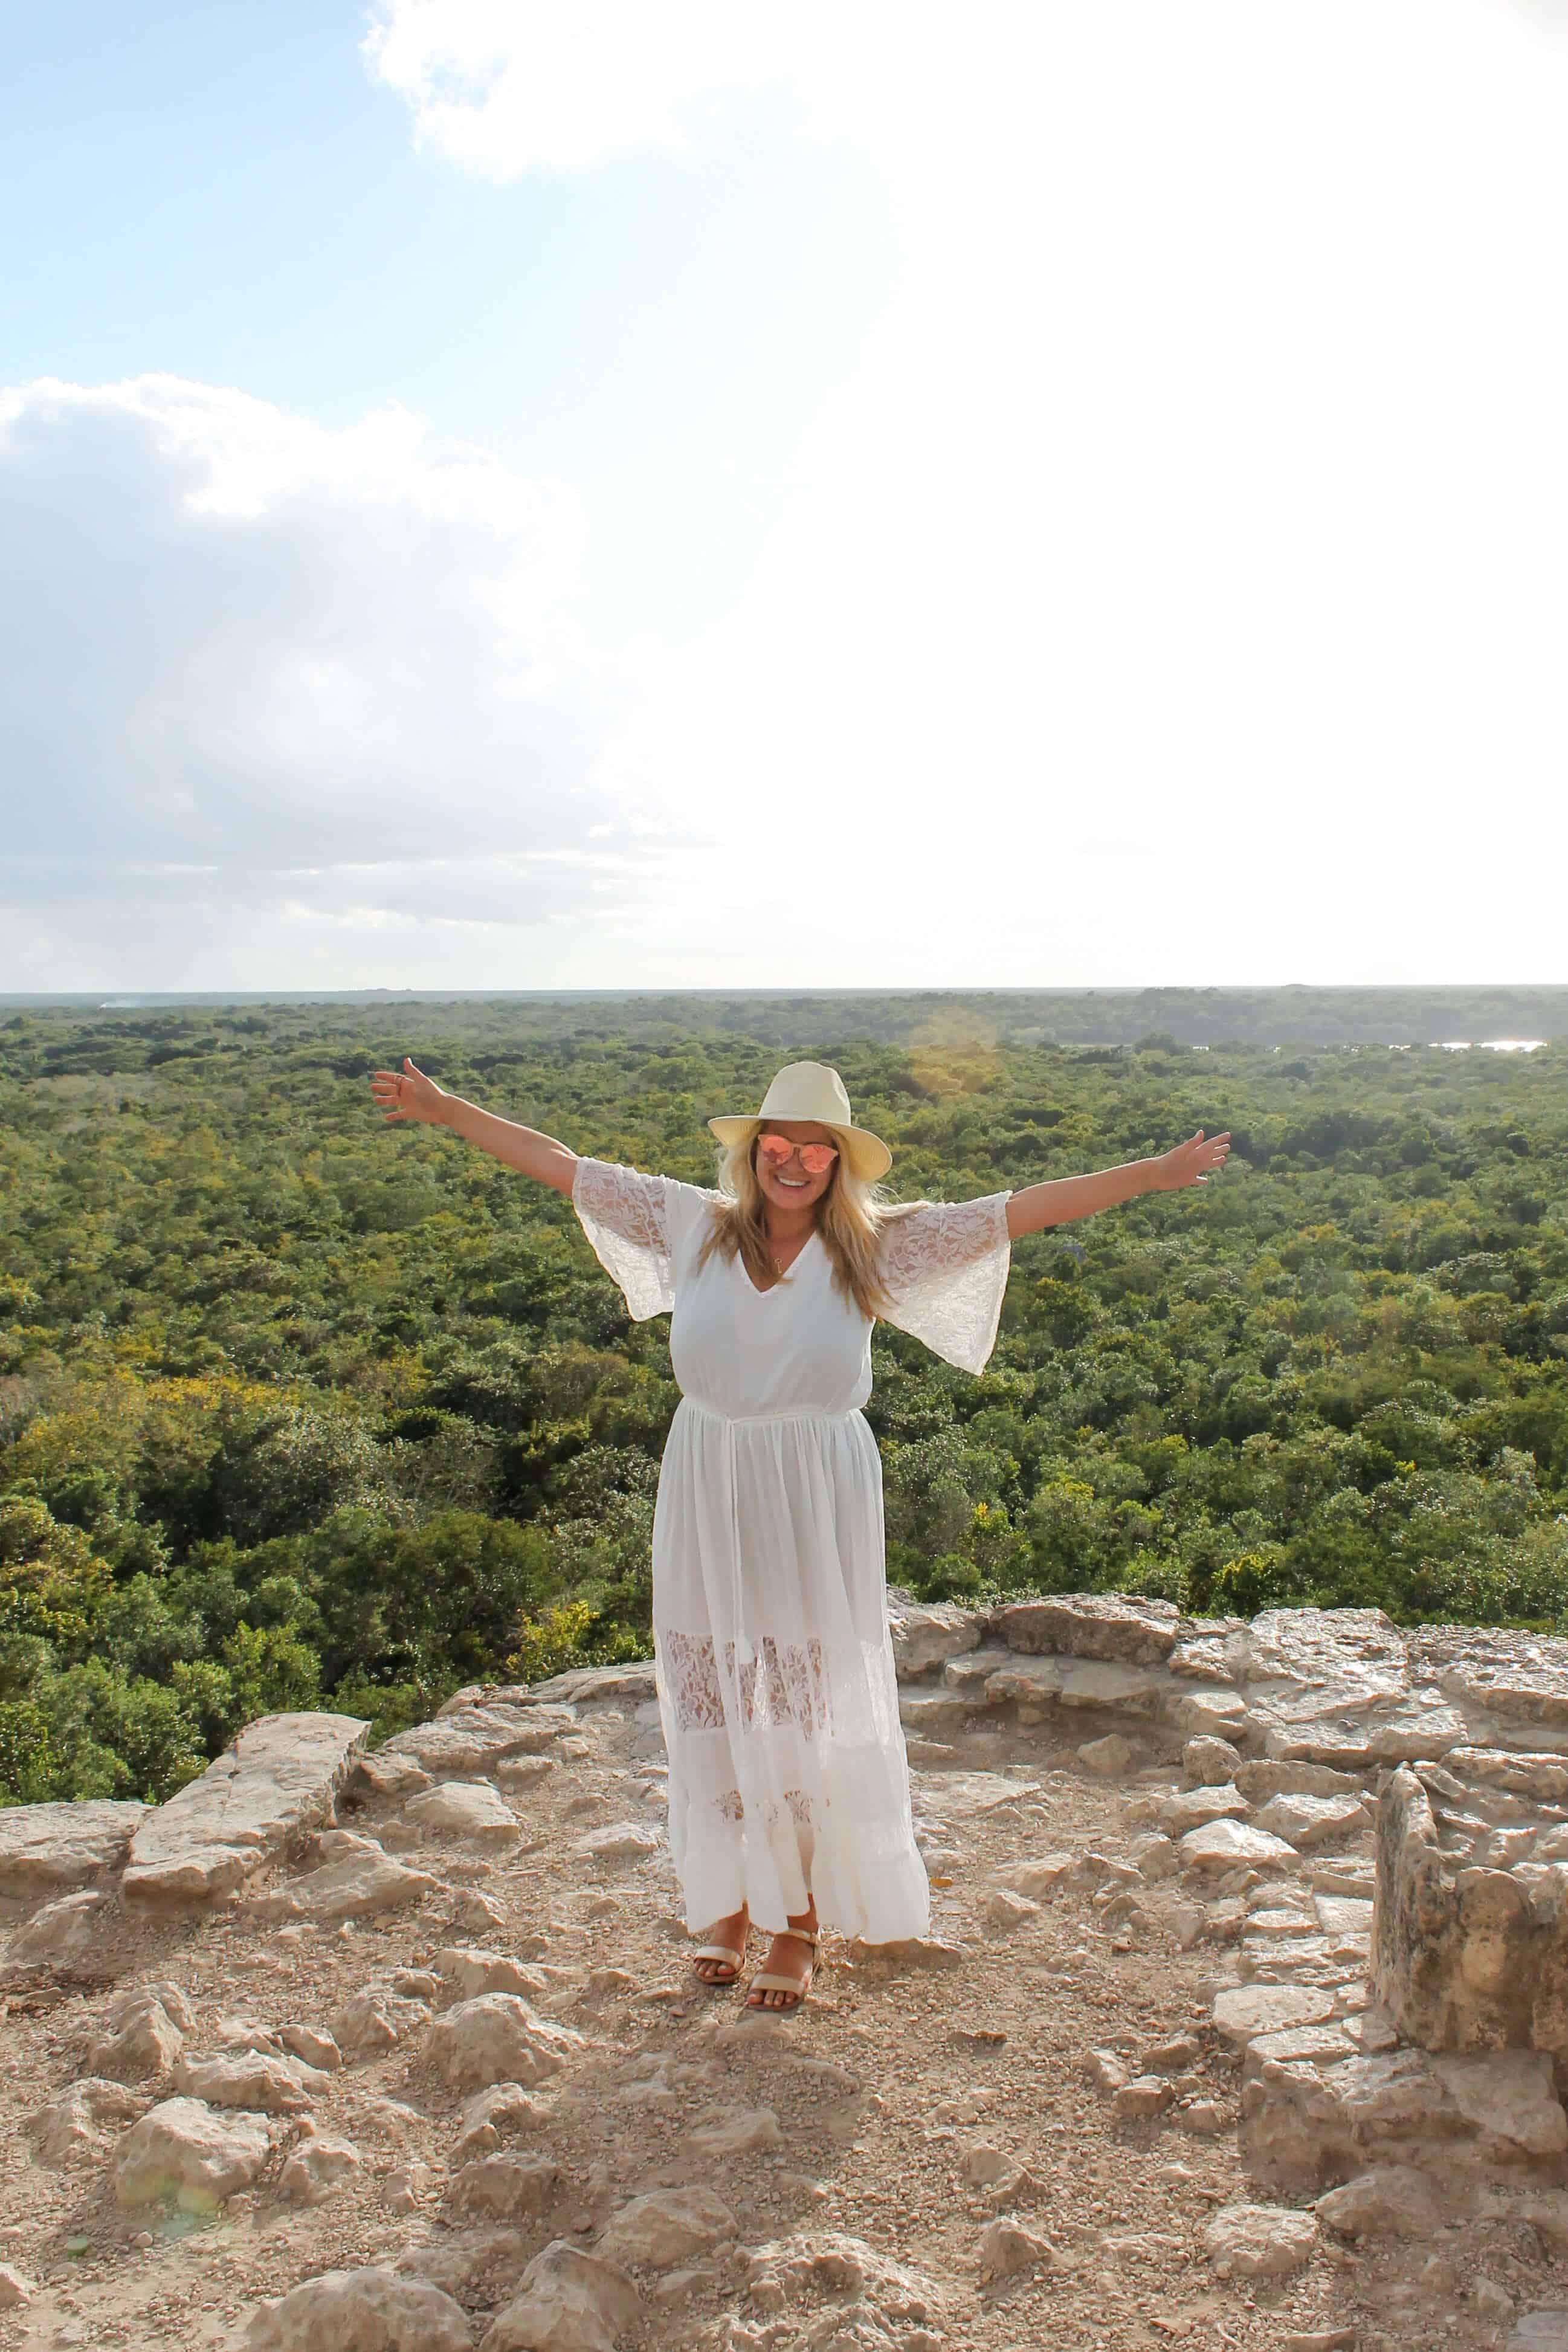 Visiting the Coba Ruins in Mexico | The Republic of Rose